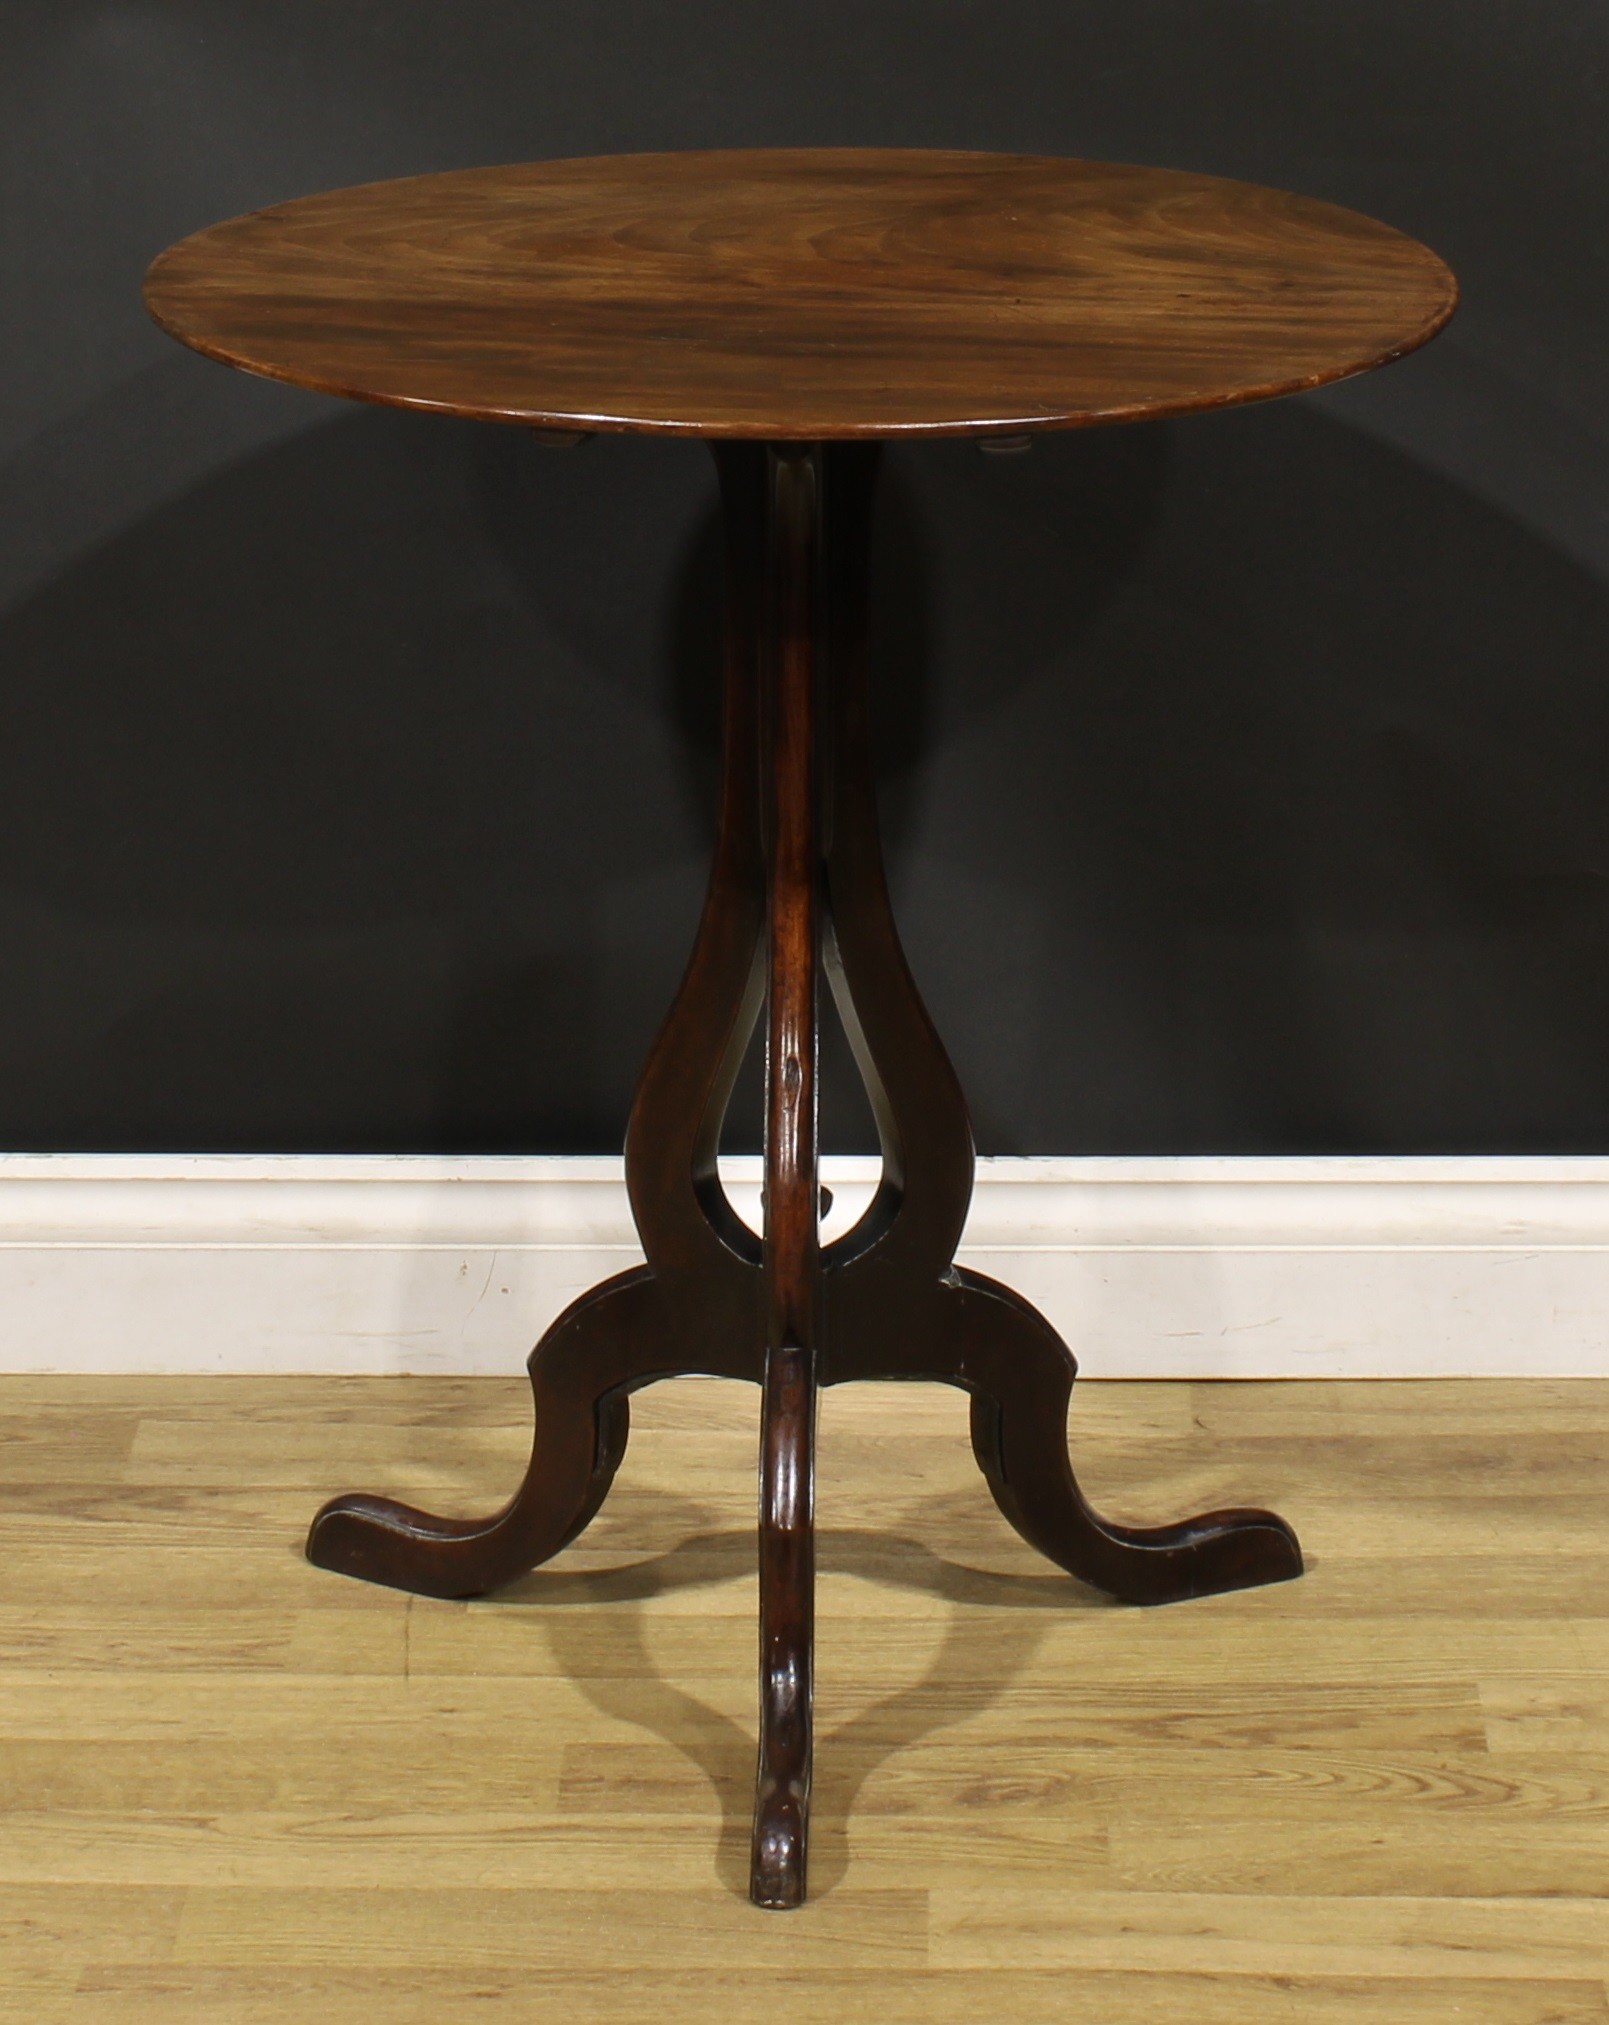 A George III mahogany tripod table, based on a design by Thomas Chippendale, circular tilting top, - Image 2 of 4